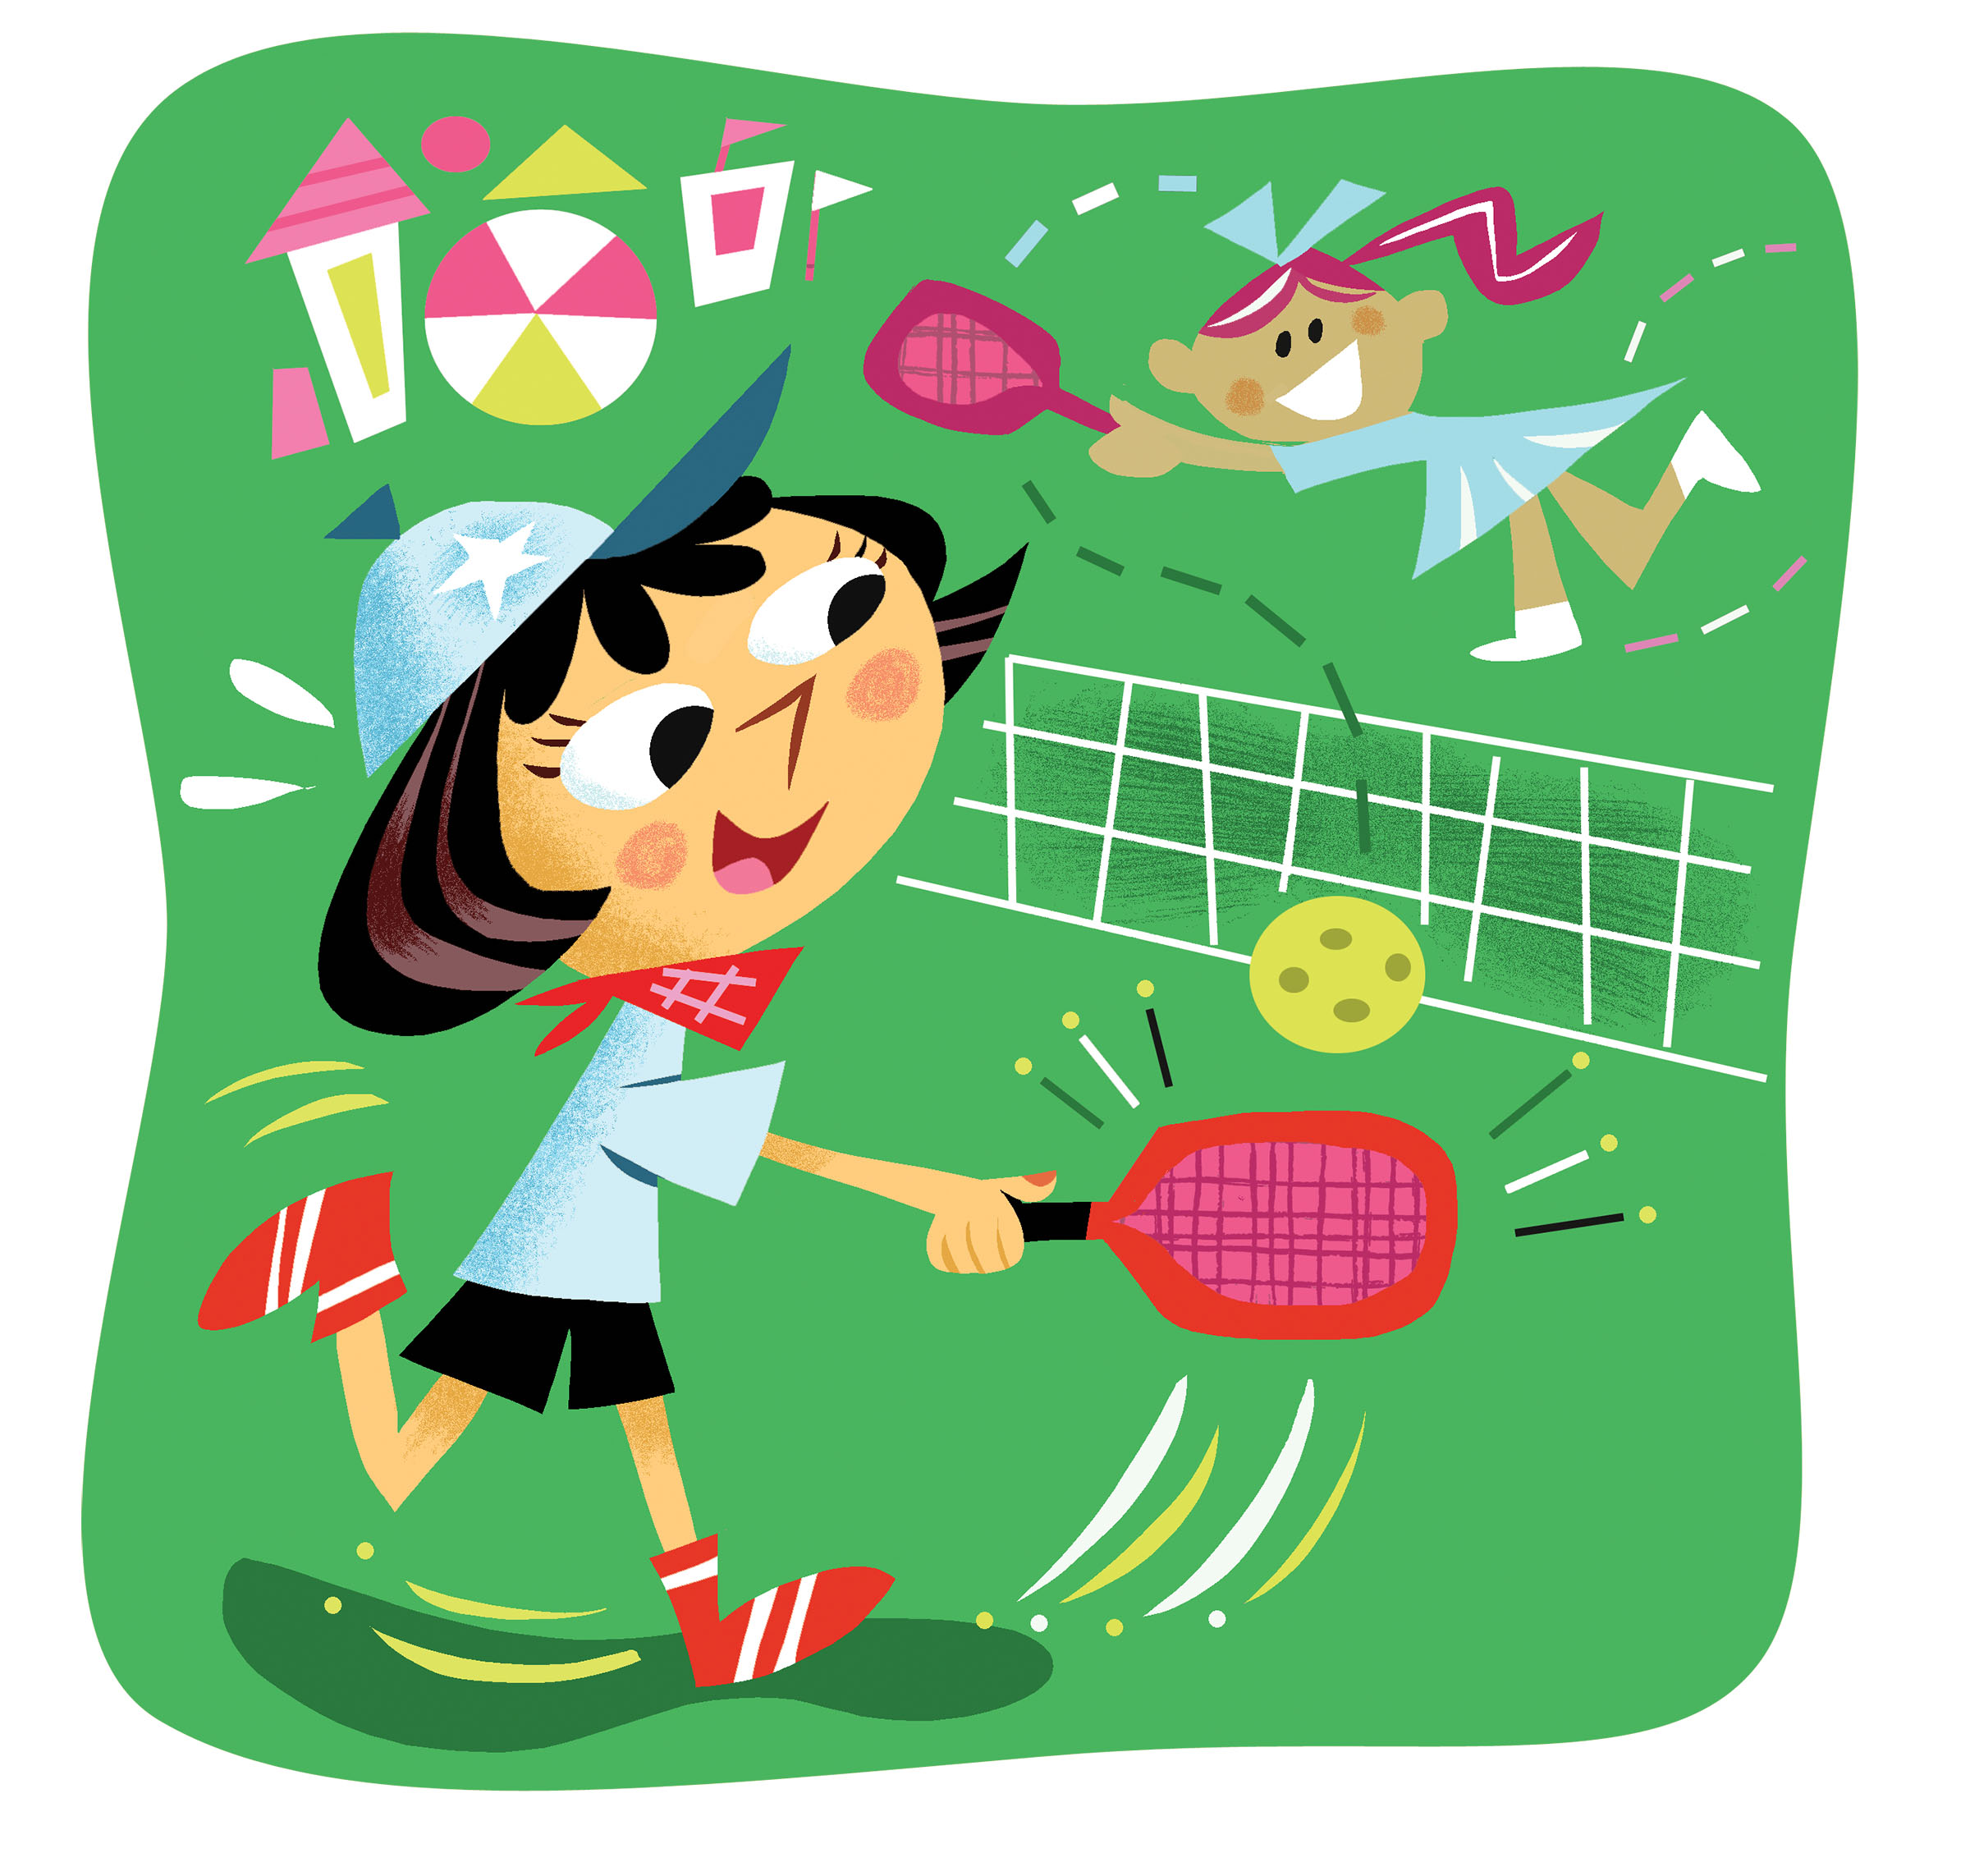 A cartoon illustration of two women playing pickleball